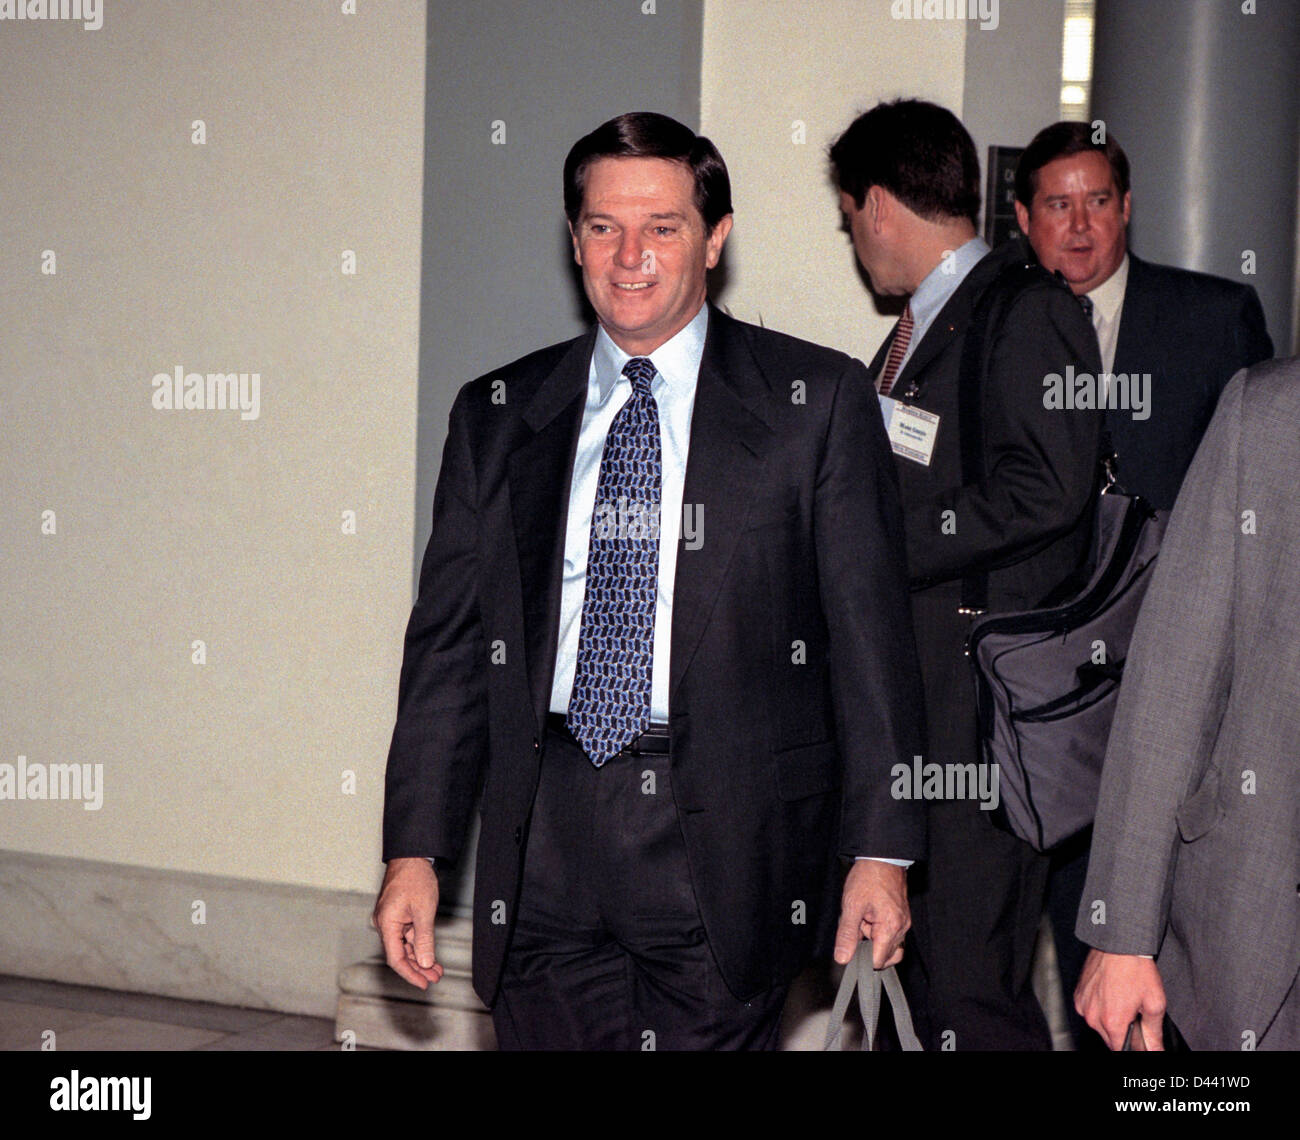 Republican Whip Tom Delay walks to the Majority Caucus meeting November 18, 1998 in Washington, DC. The caucus is electing a new speaker and leadership positions following midterm elections. Stock Photo